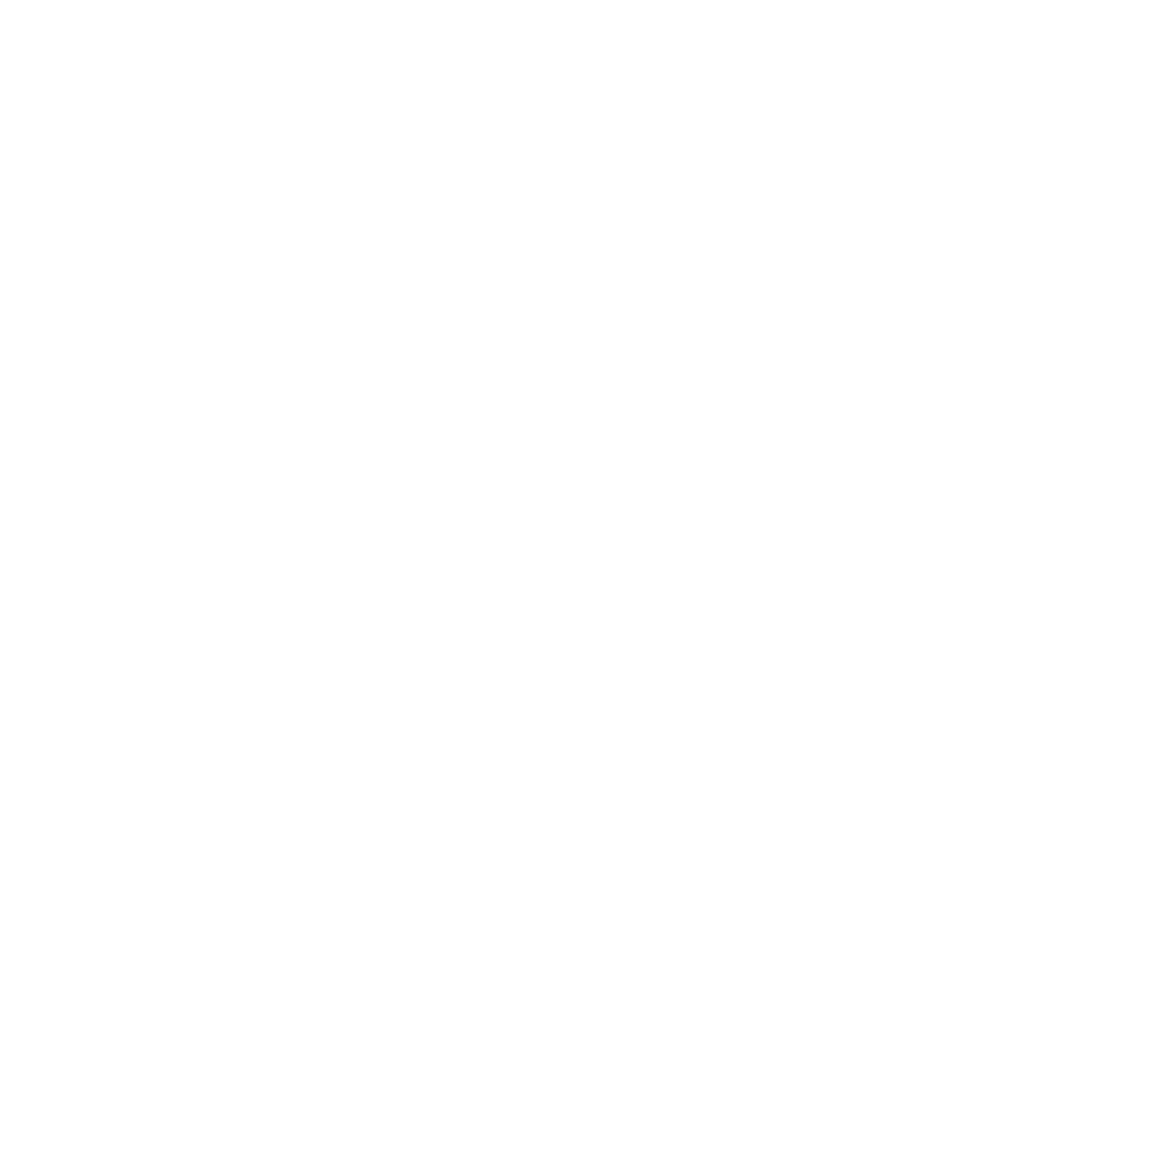 Lineart of a chalice or cup featuring a central star, symbolizing user experience achievement.